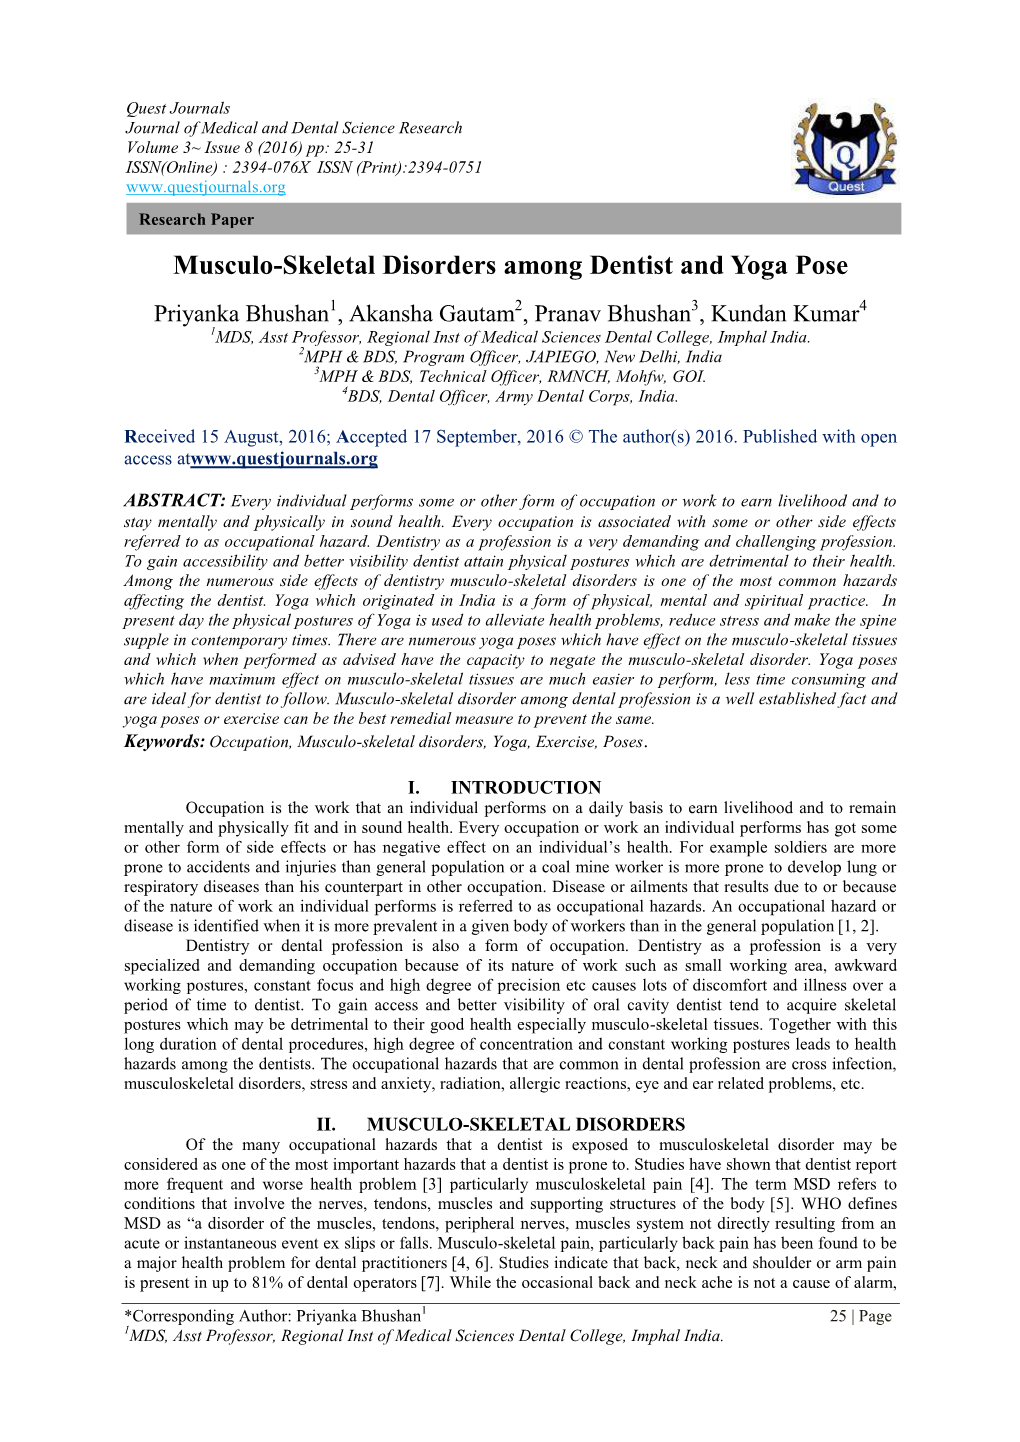 Musculo-Skeletal Disorders Among Dentist and Yoga Pose